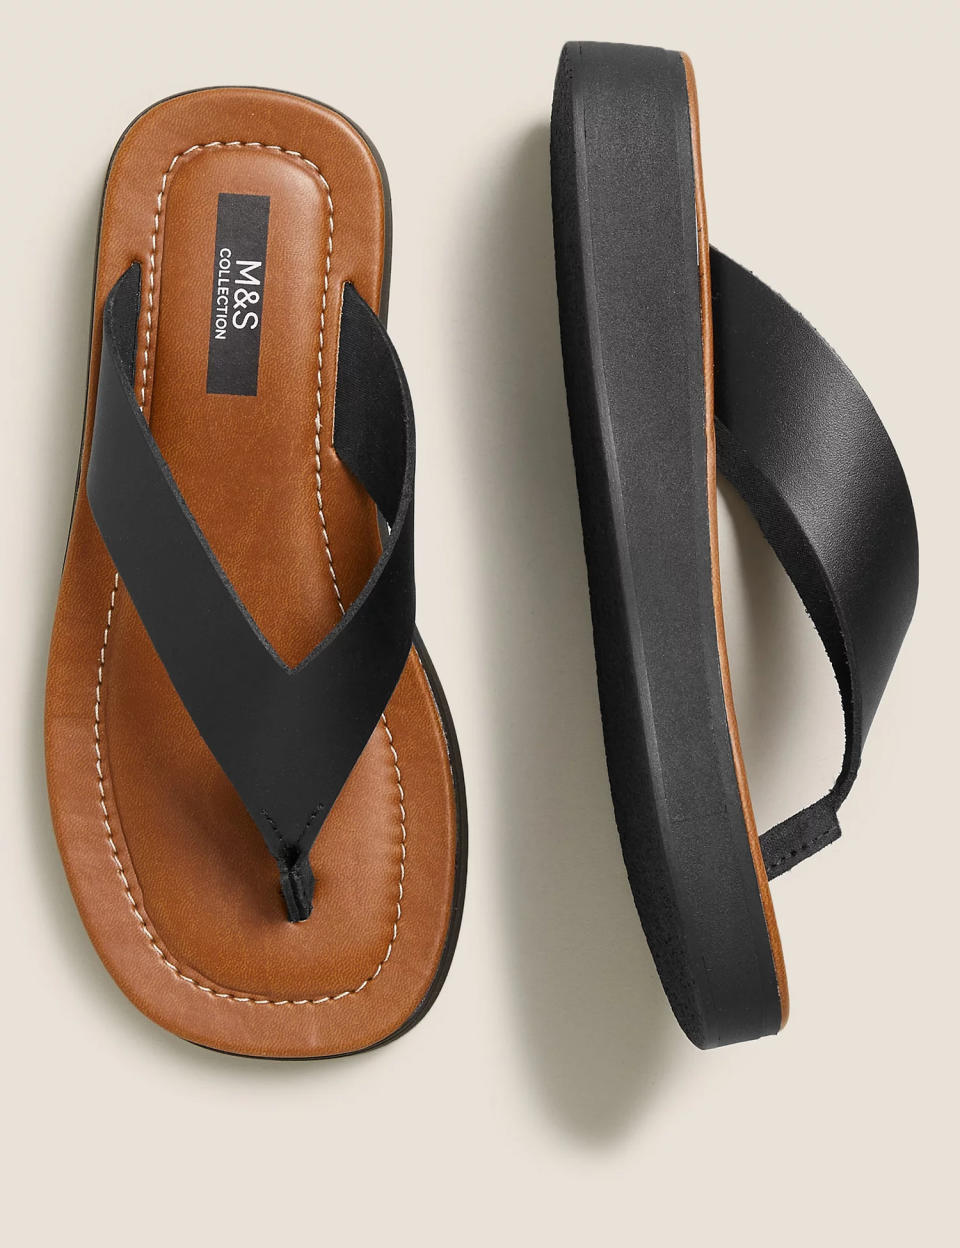 Casual yet chic - these flip flops are a holiday must-have. (Marks & Spencer)